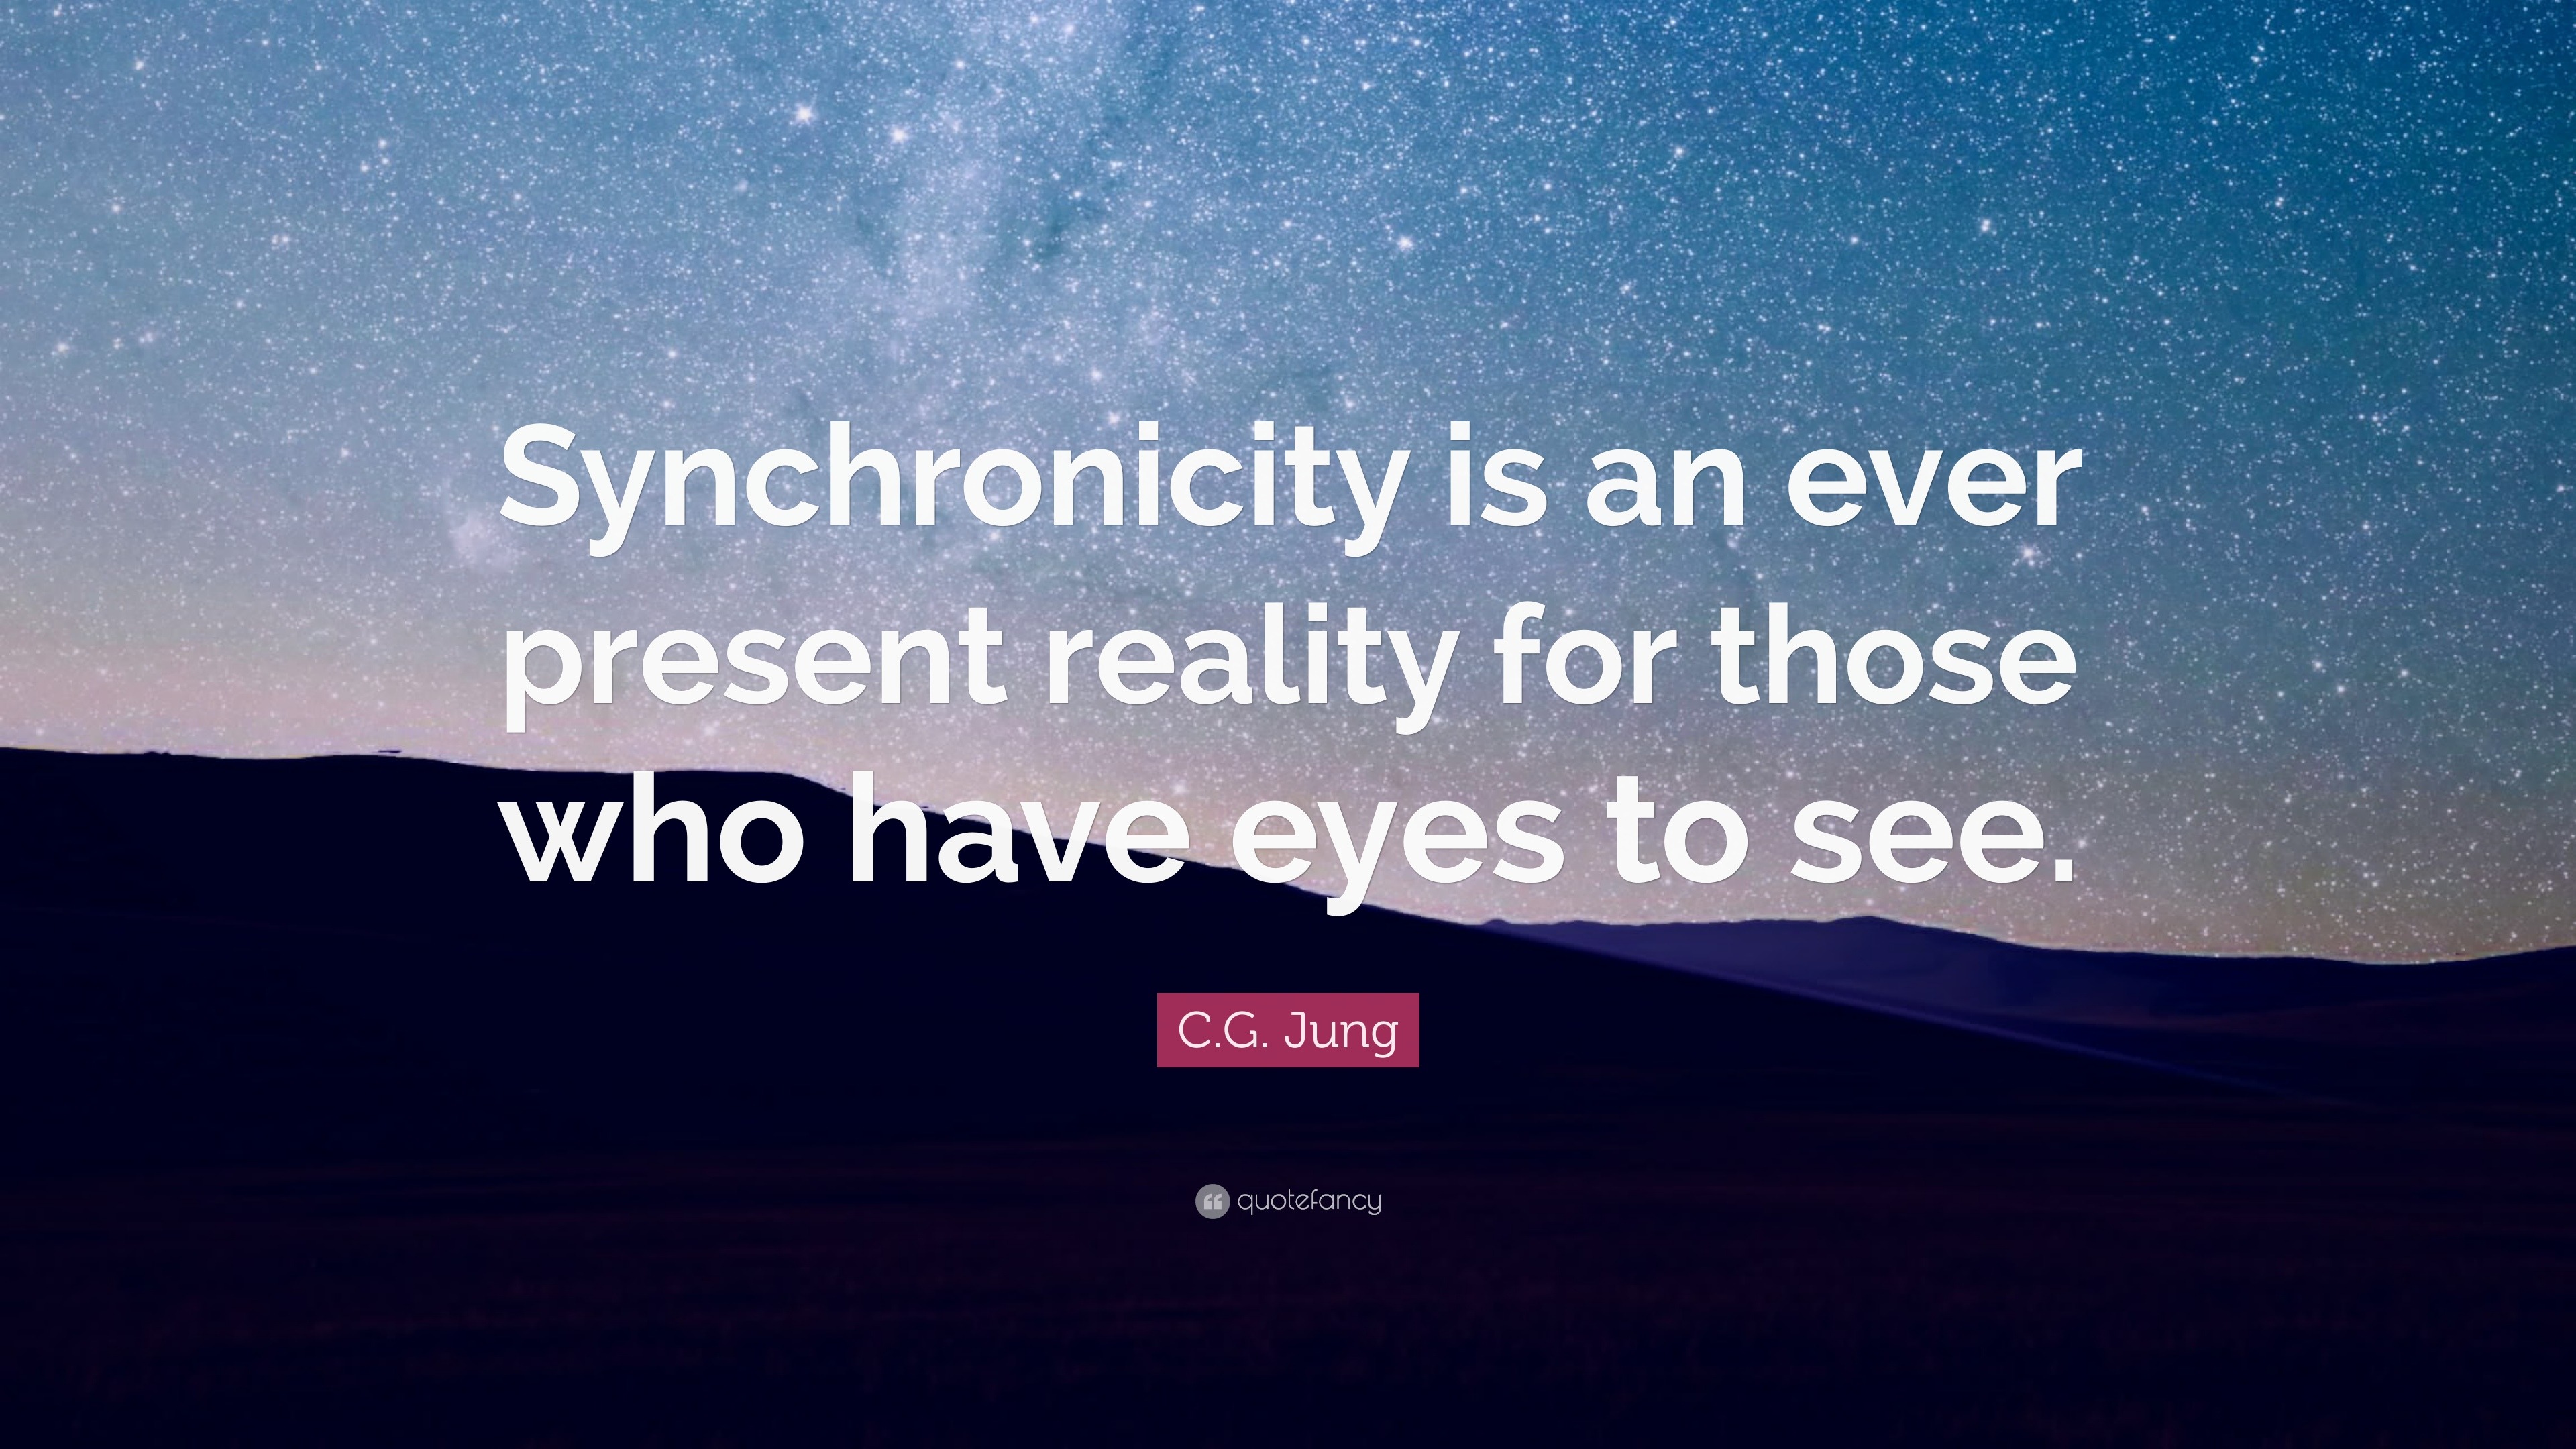 C.G. Jung Quote: “Synchronicity is an ever present reality for those